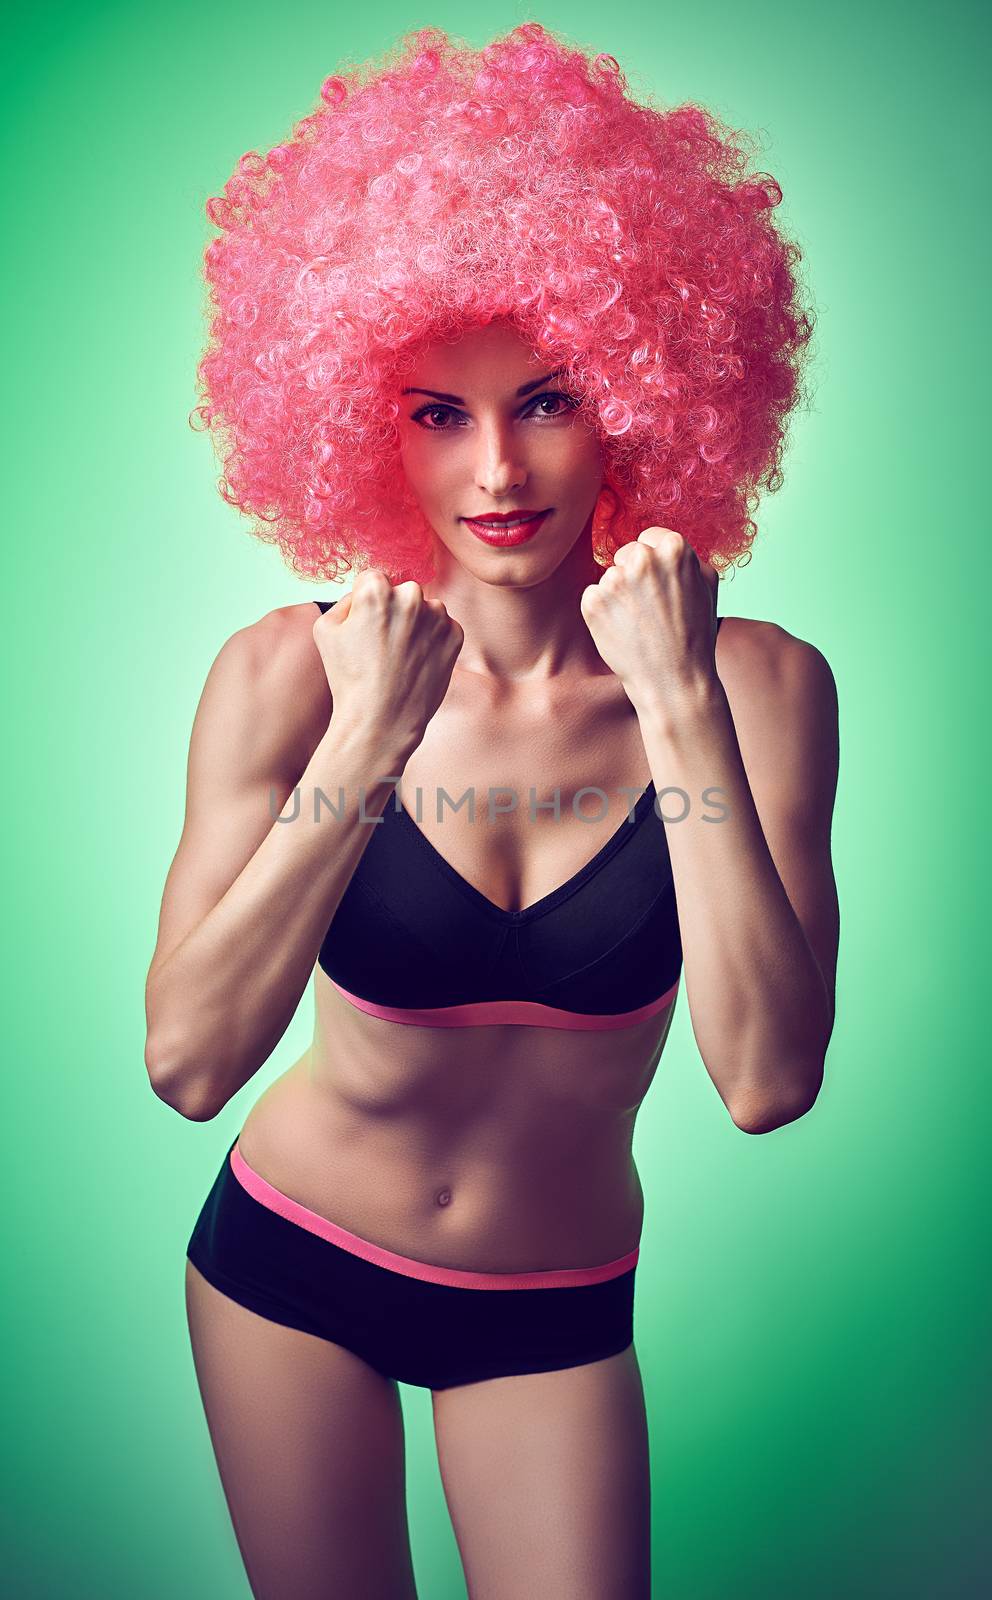 Beauty fashion. Fitness woman smiling, unusual look. Sexy athletic body, people. Provocative attractive girl posing in trendy sport bra, shorts with afro hairstyle, green background, copyspace, toned